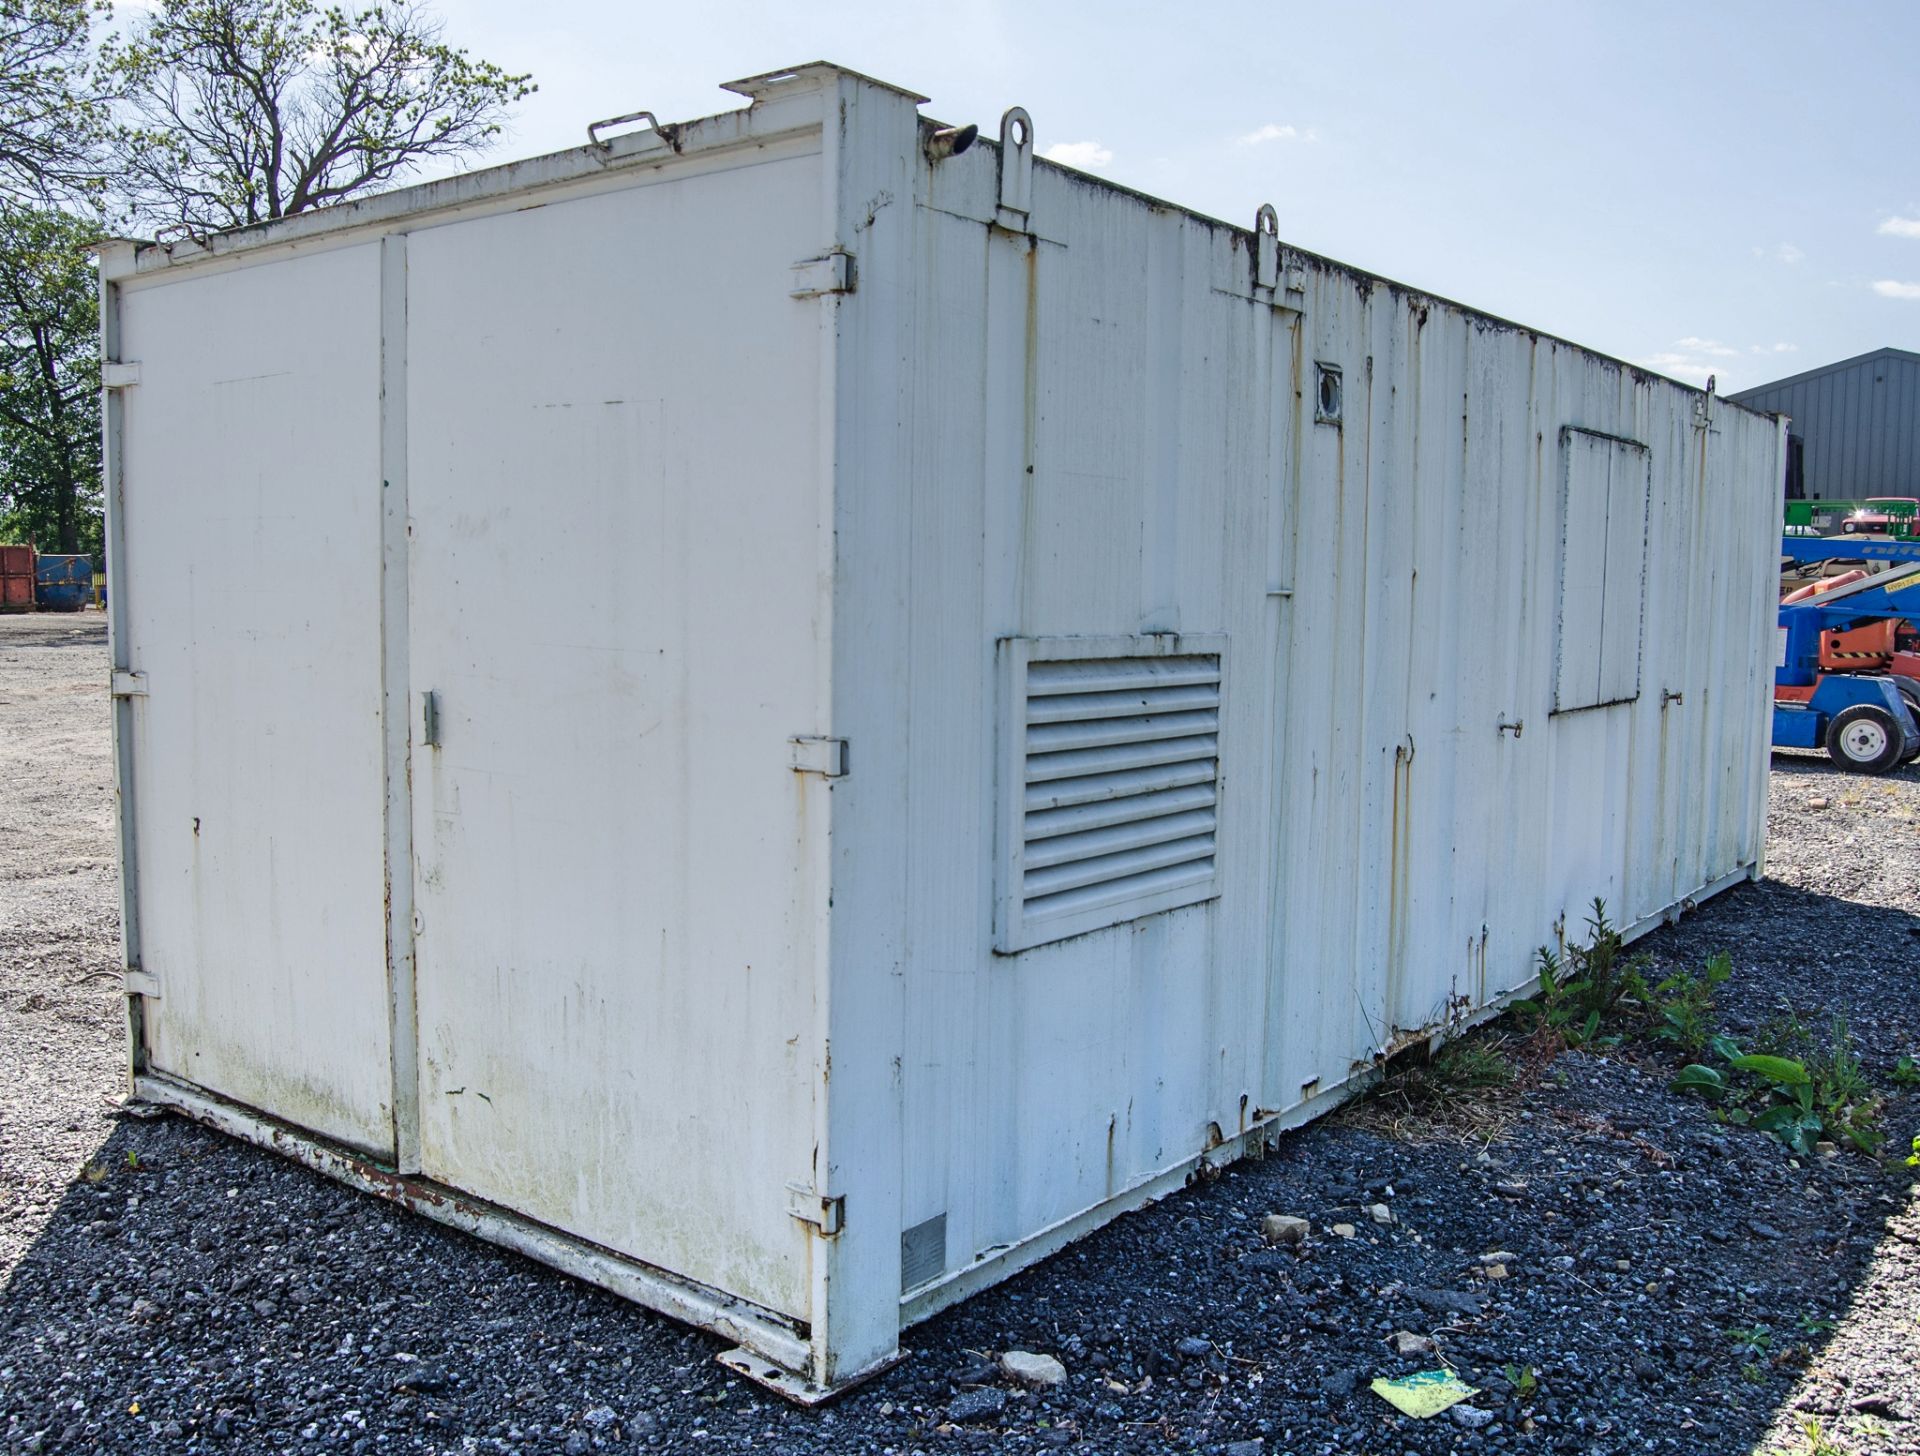 24ft x 9 ft steel anti-vandal welfare site unit Comprising of: canteen area, changing area, - Image 4 of 12